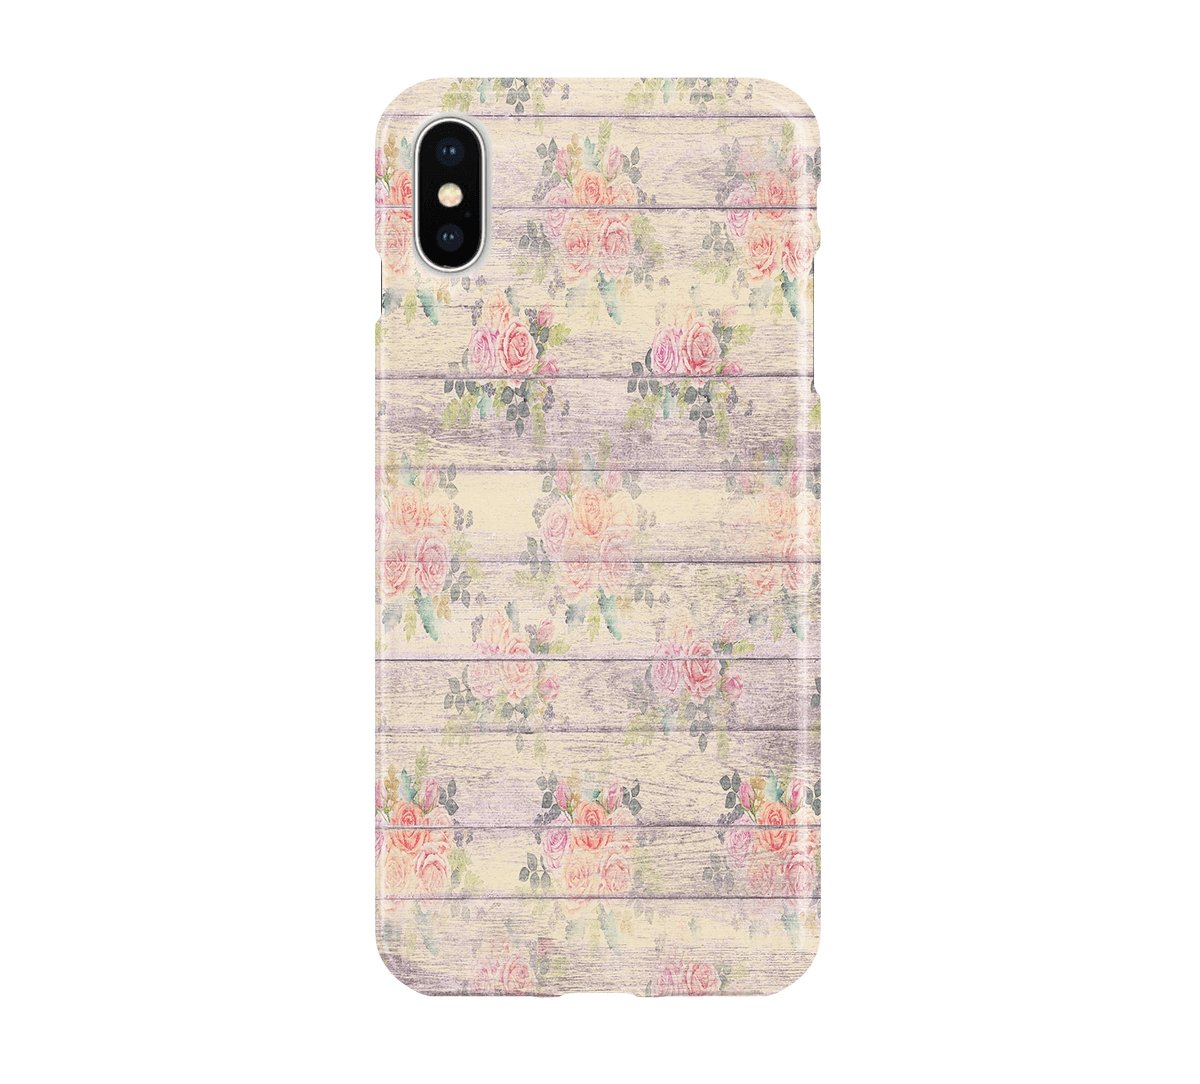 Shabby Chic Rosewood - iPhone phone case designs by CaseSwagger